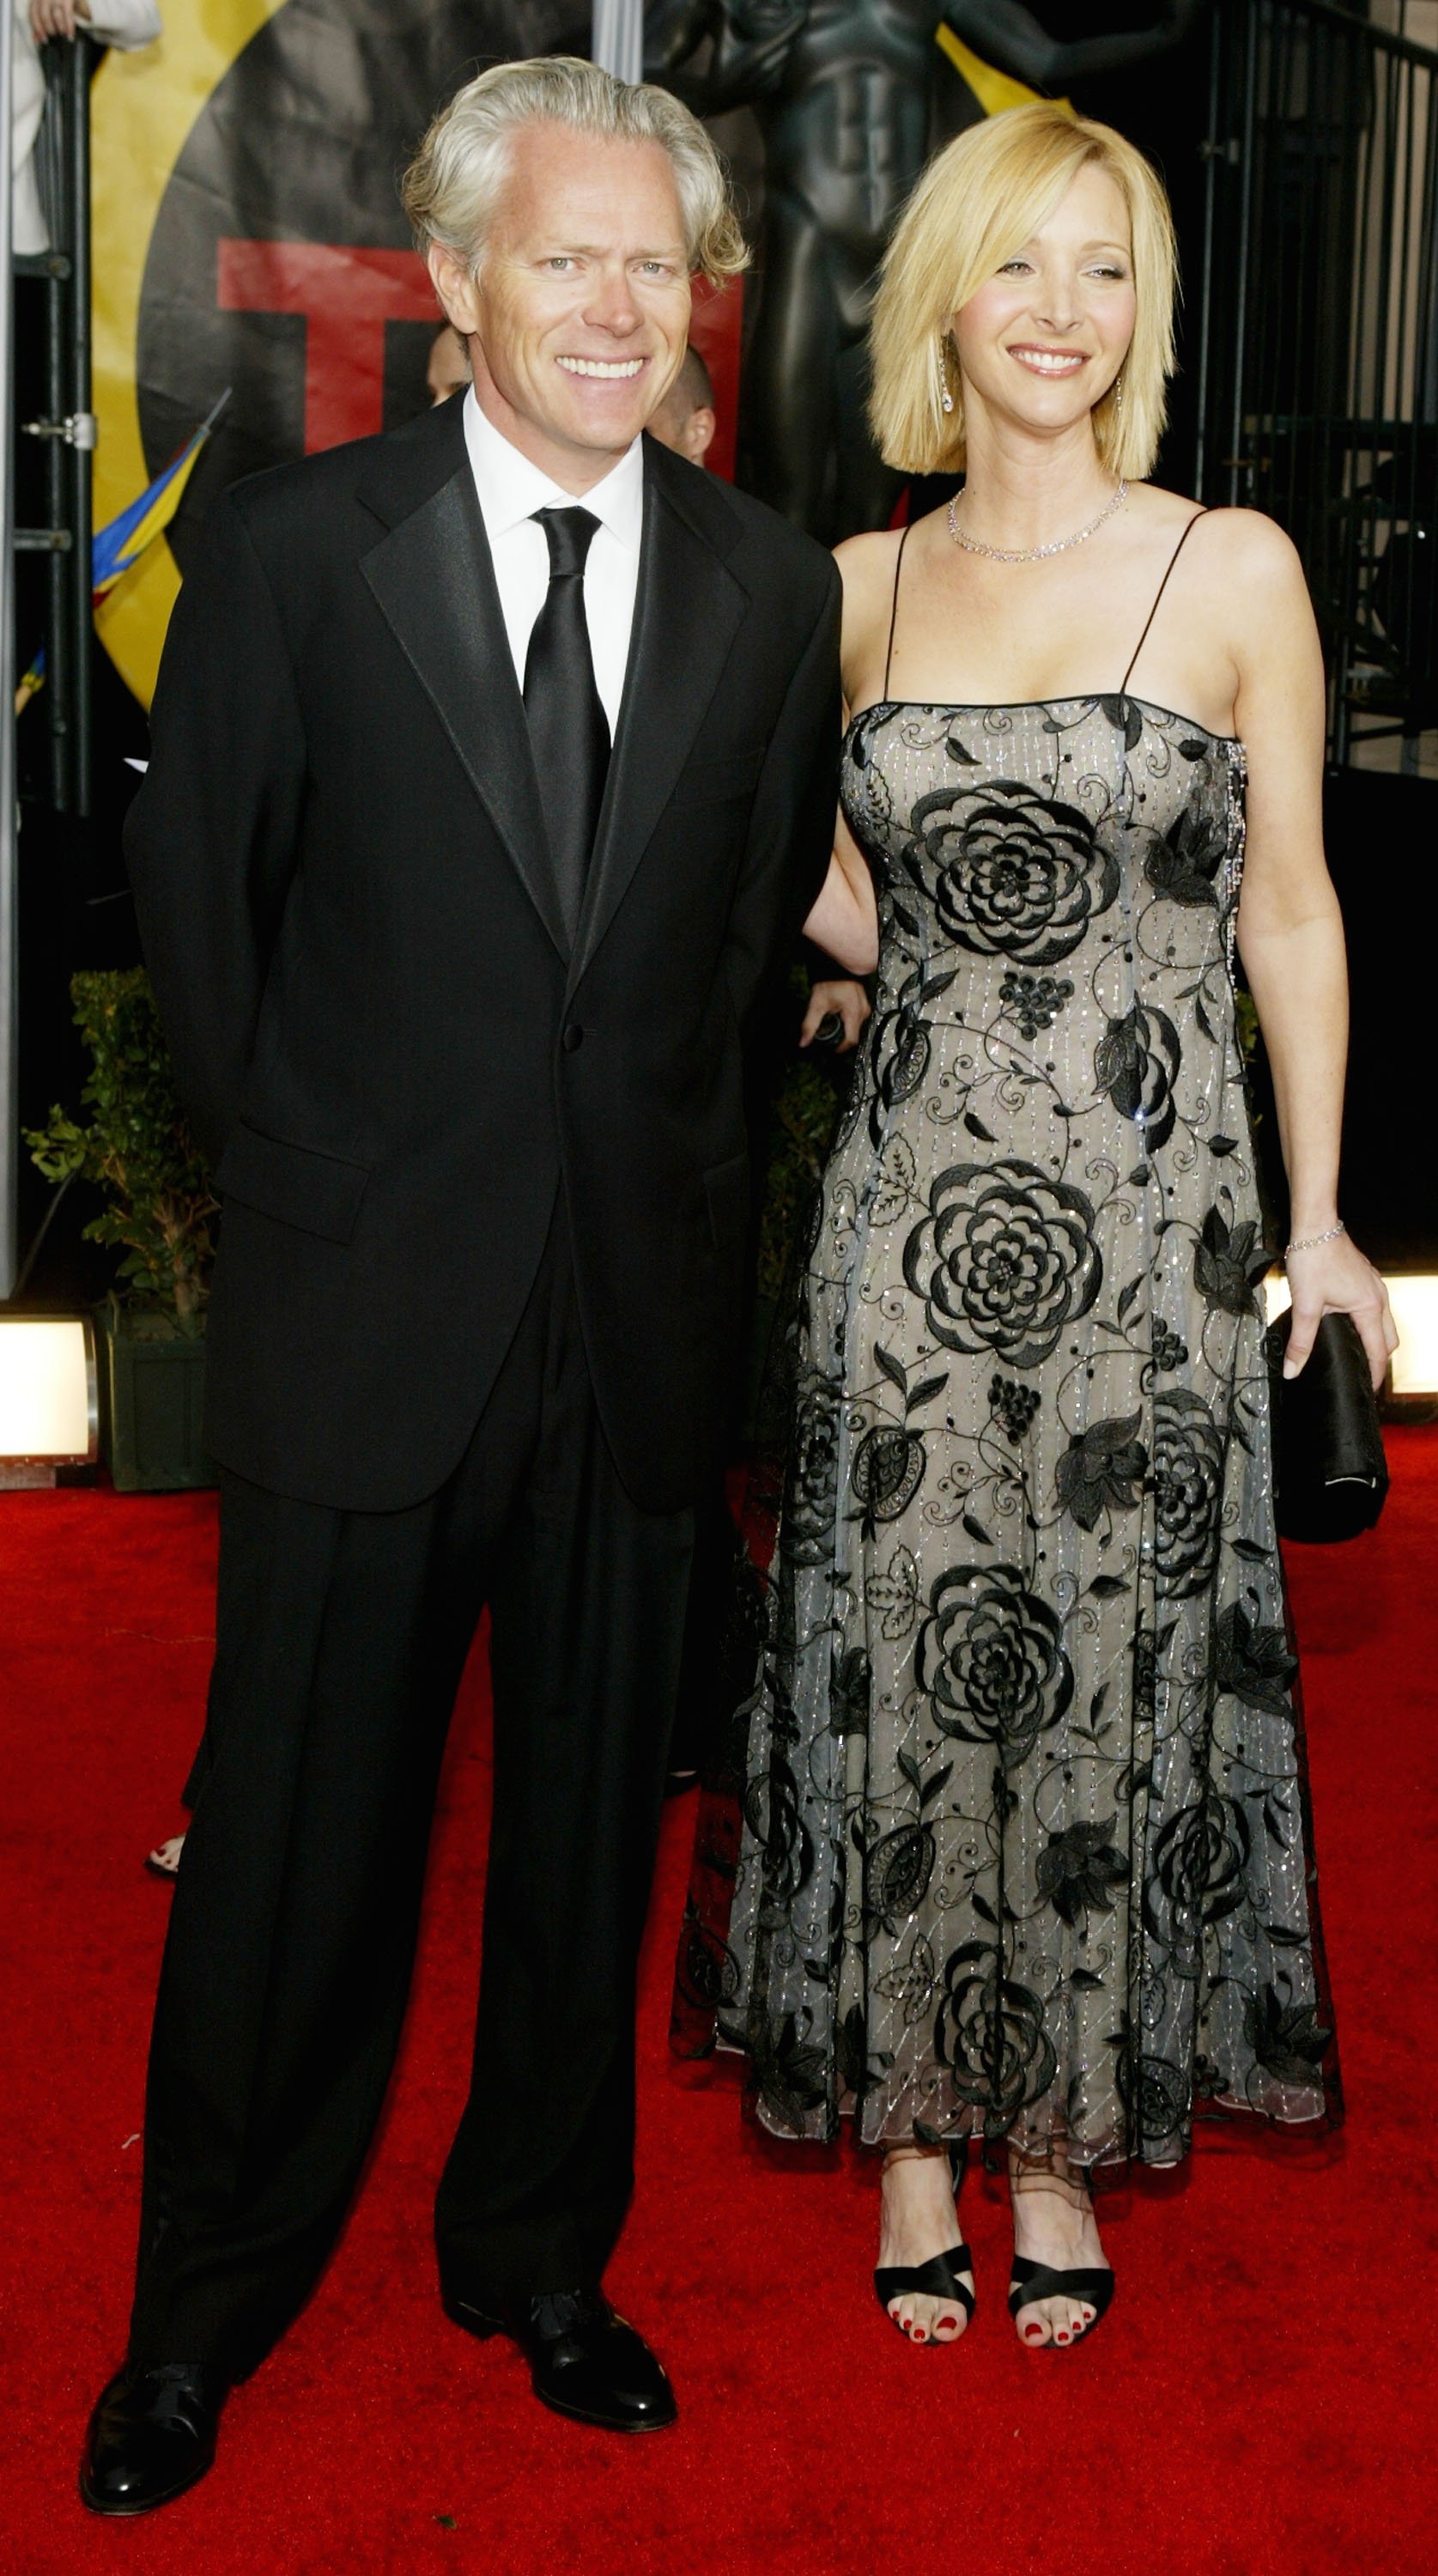 Lisa Kudrow ad Miichel Stern at the 10th Annual Screen Actors Guild Awards on February 22, 2004, in Los Angeles. | Source: Getty Images